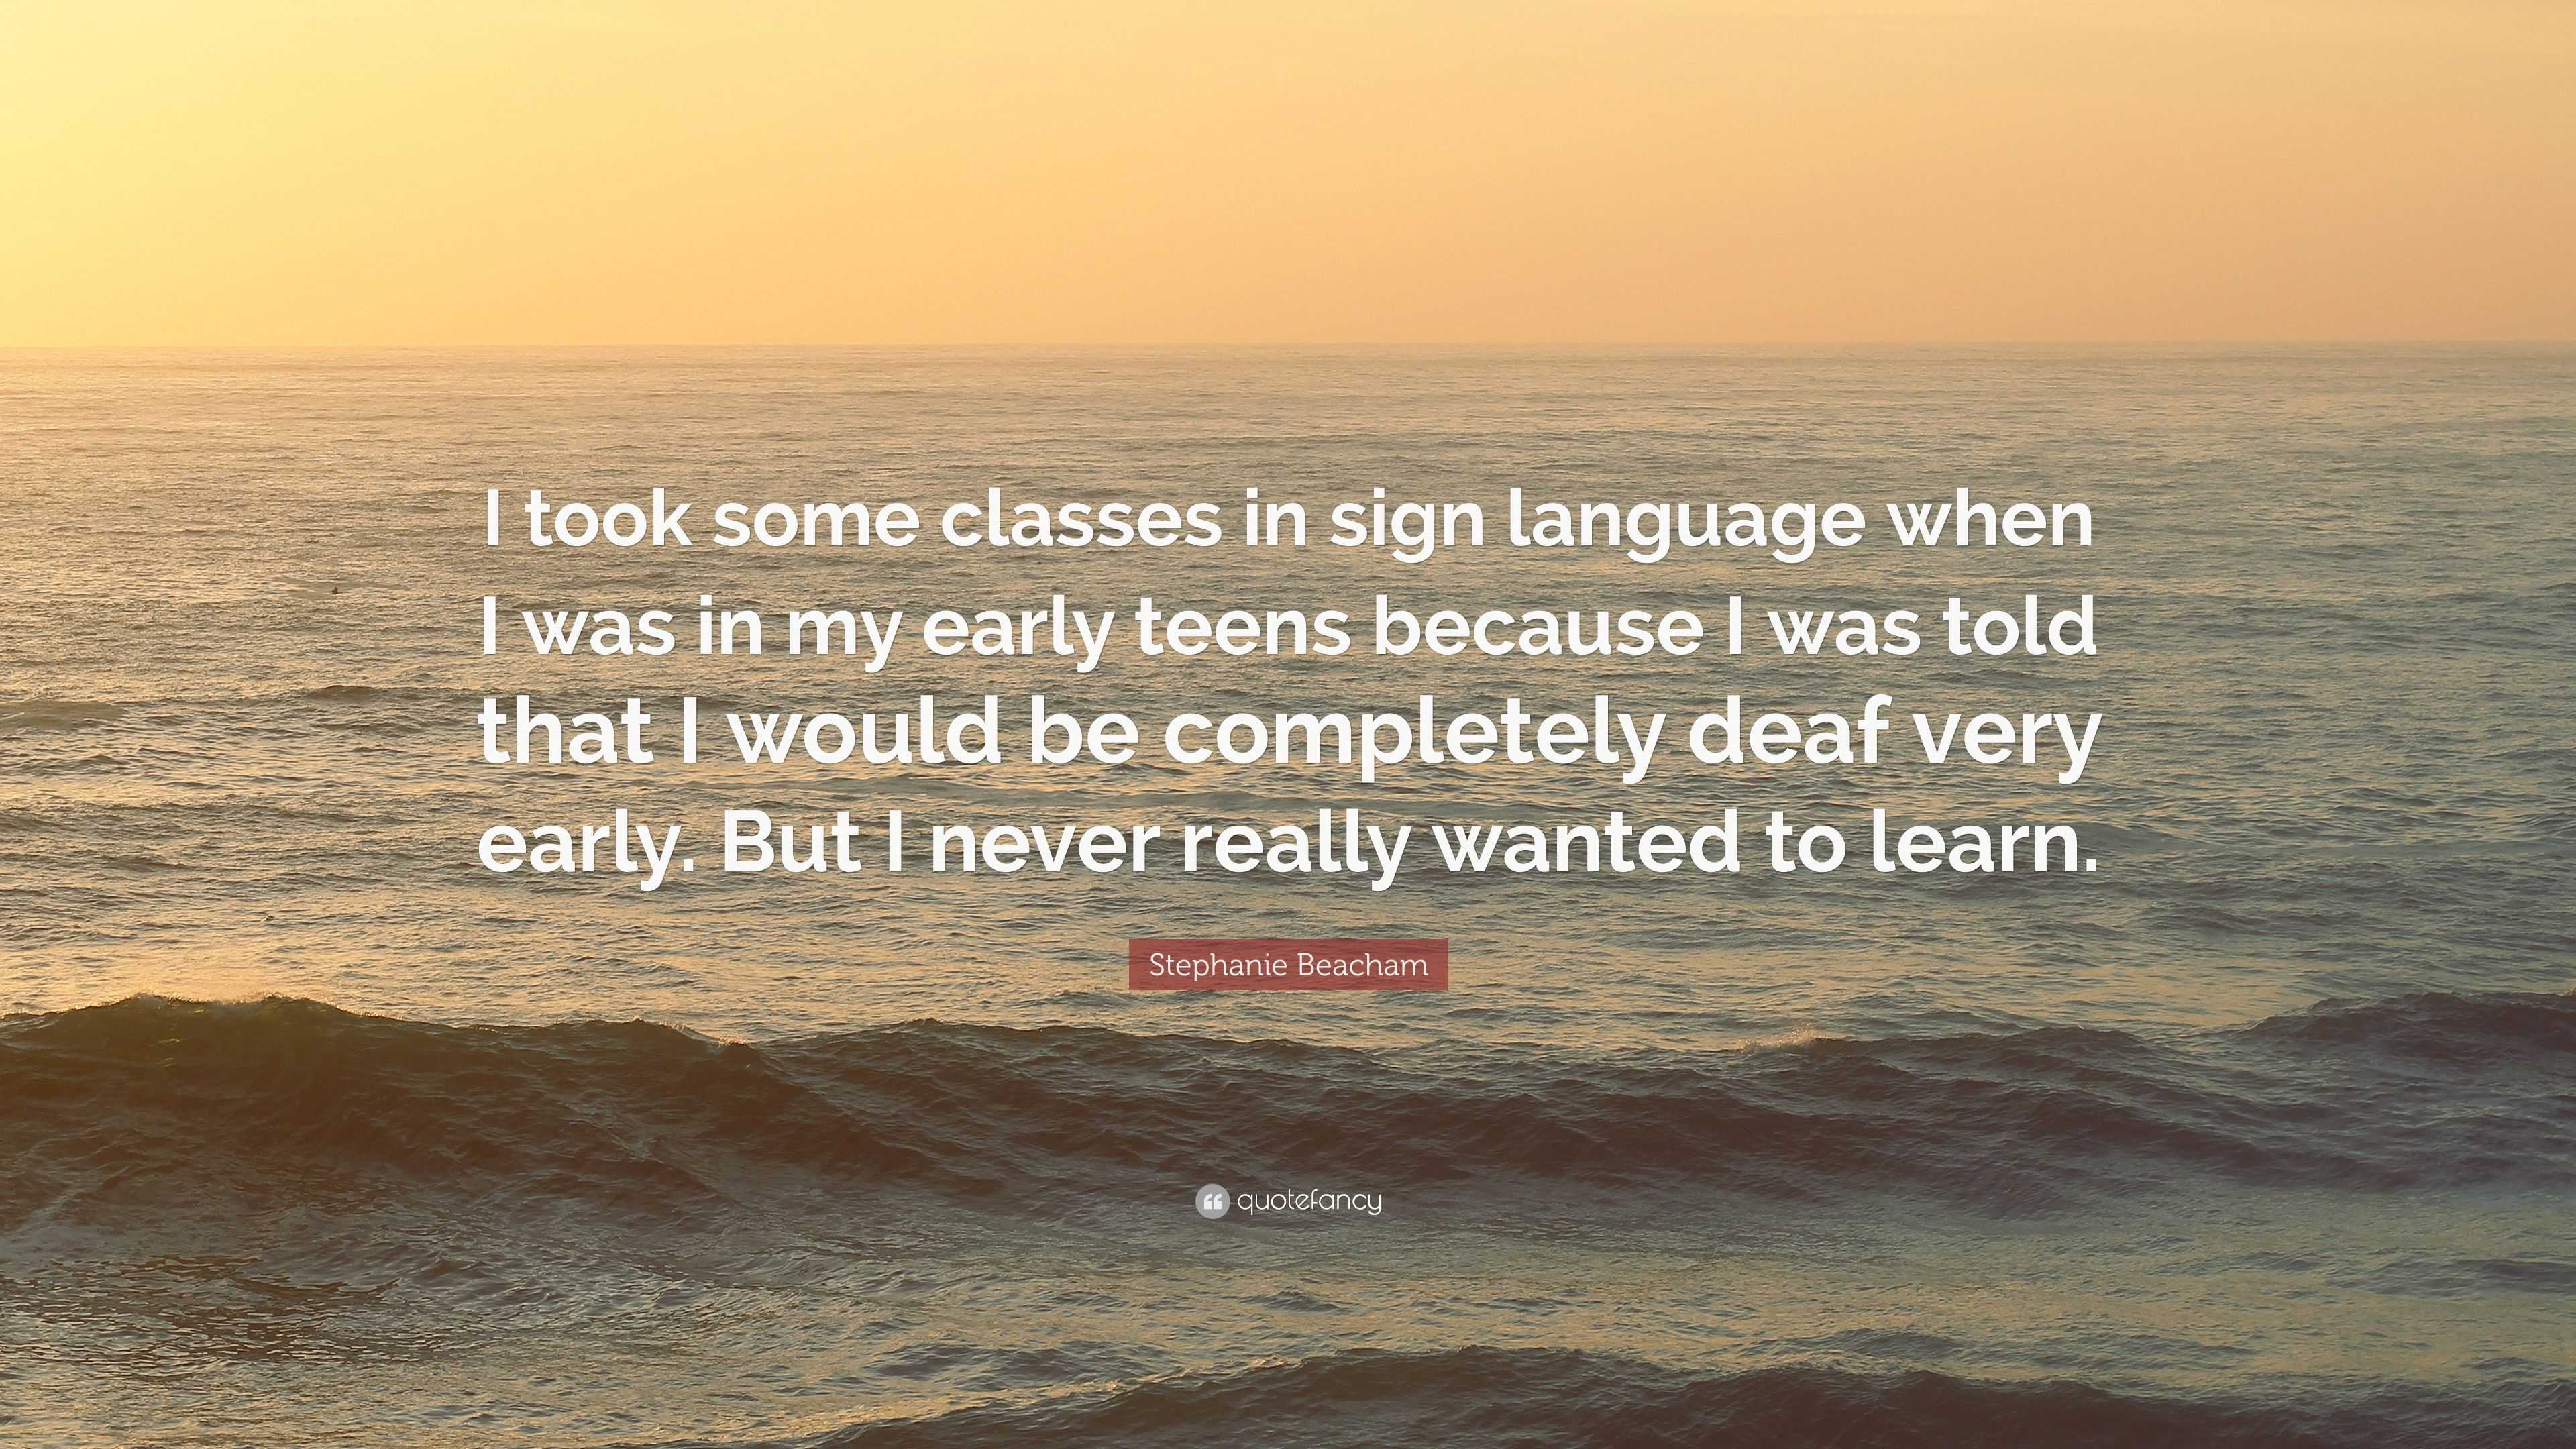 Stephanie Beacham Quote: “I took some classes in sign language when I ...